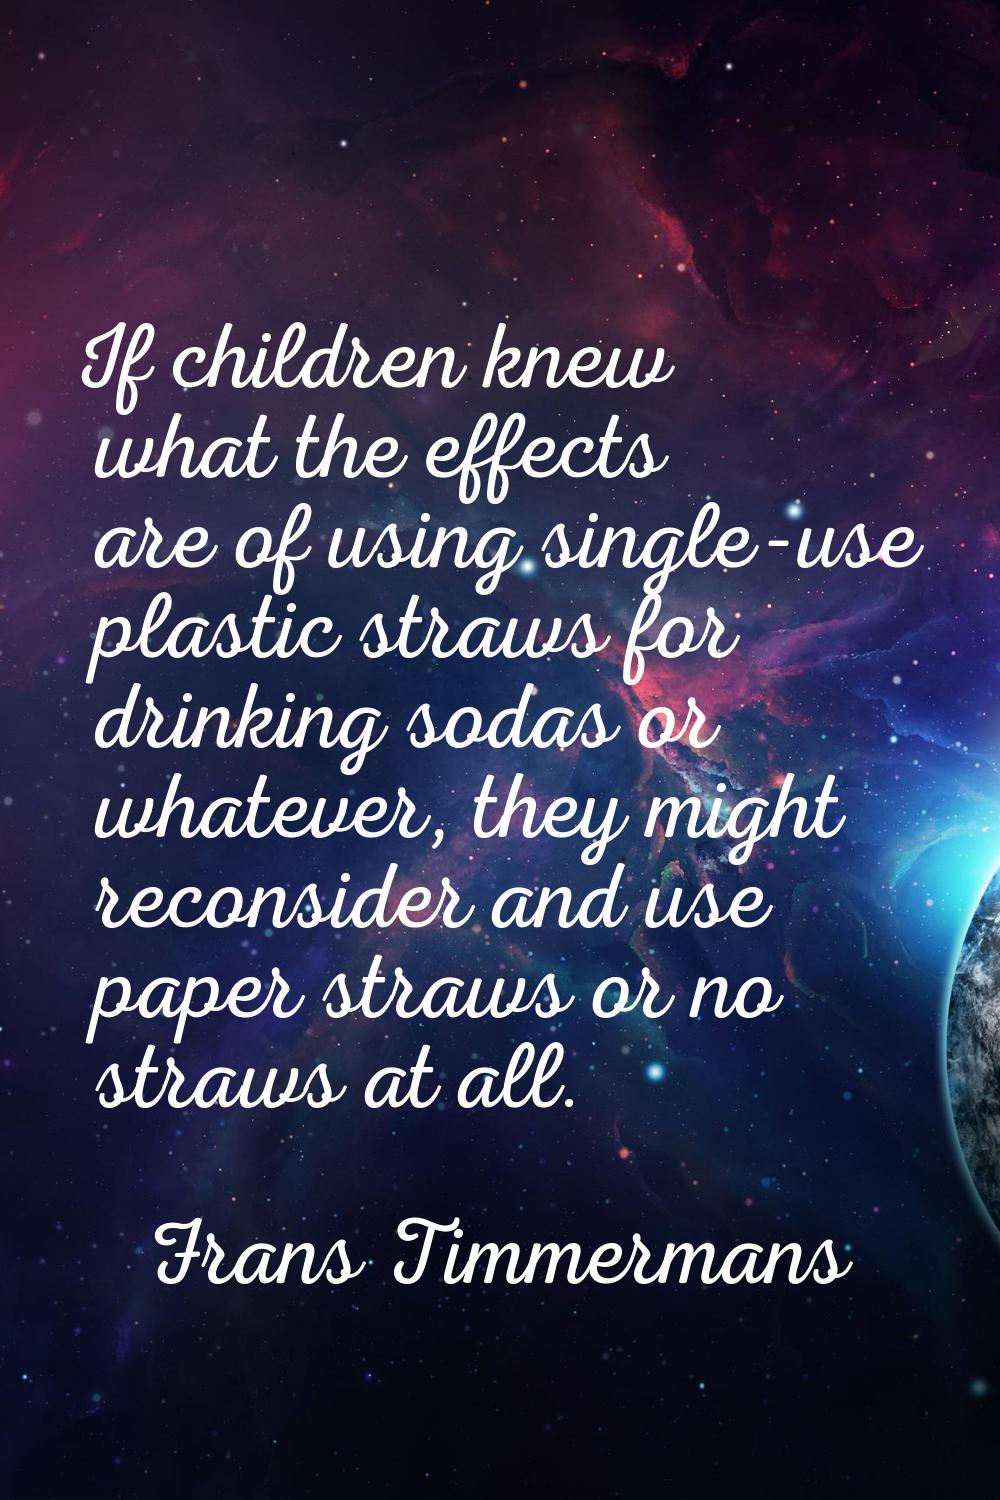 If children knew what the effects are of using single-use plastic straws for drinking sodas or what